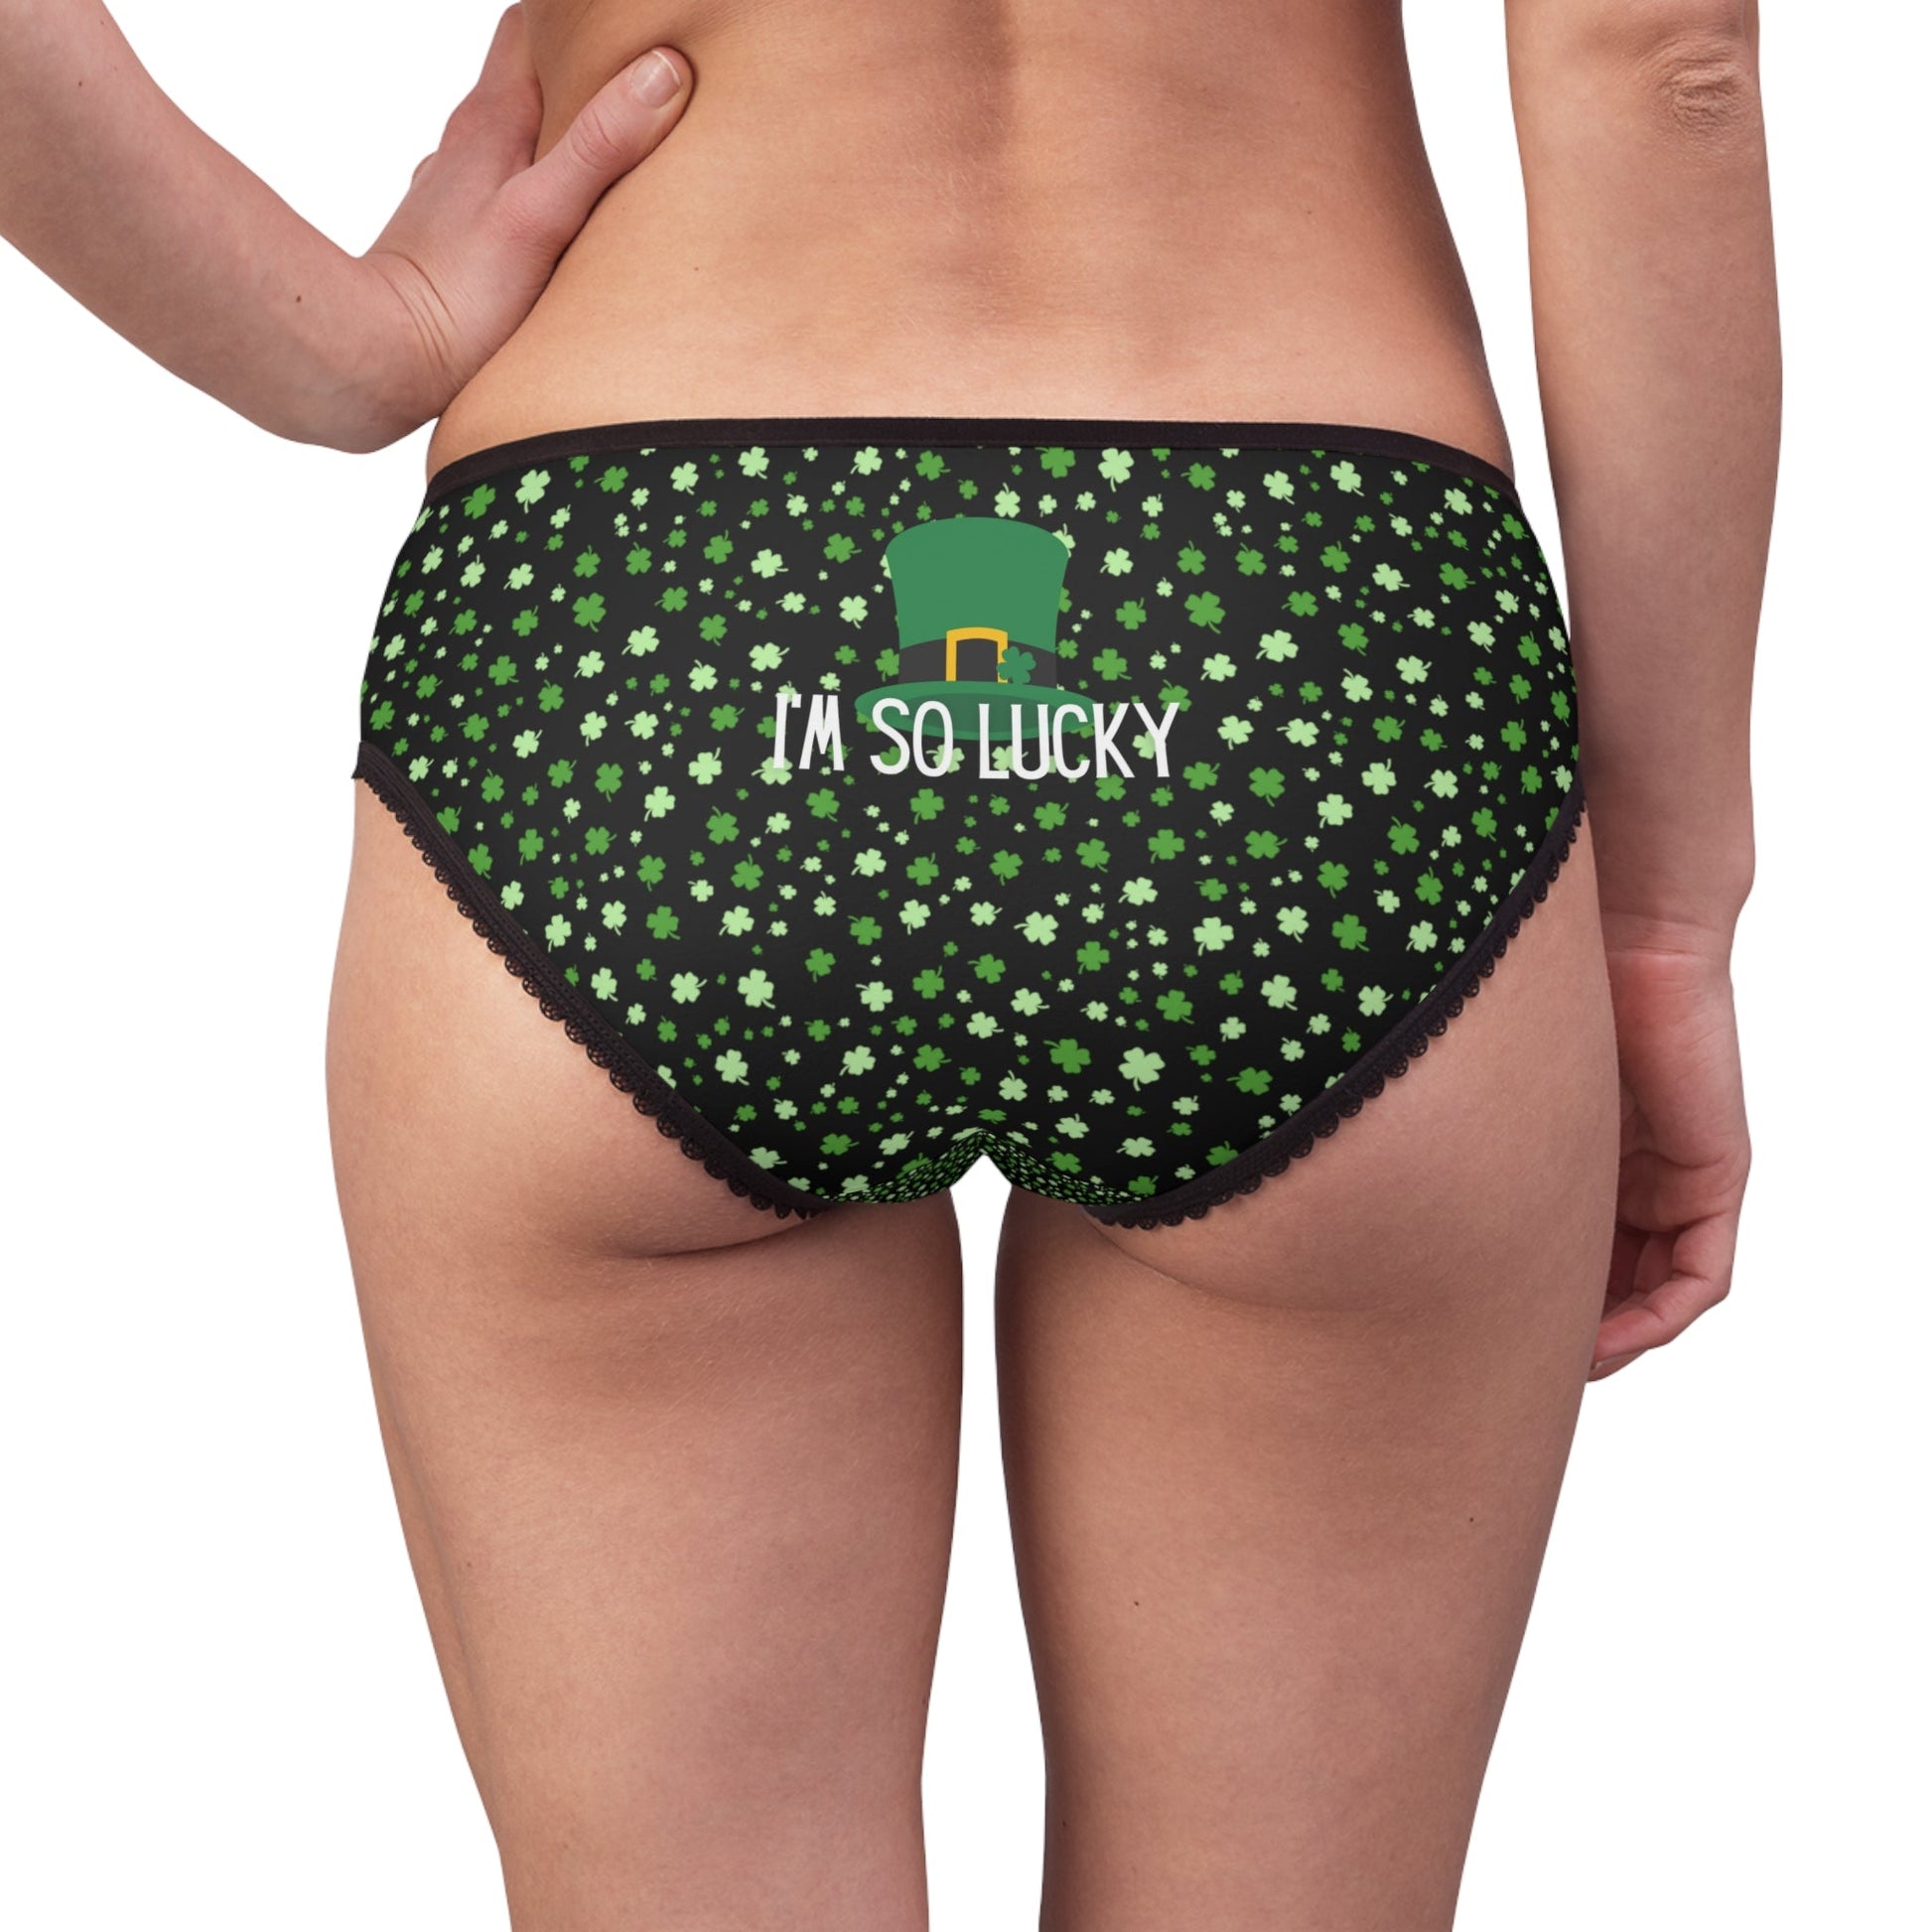 I’m So Lucky Undies - All Over Prints